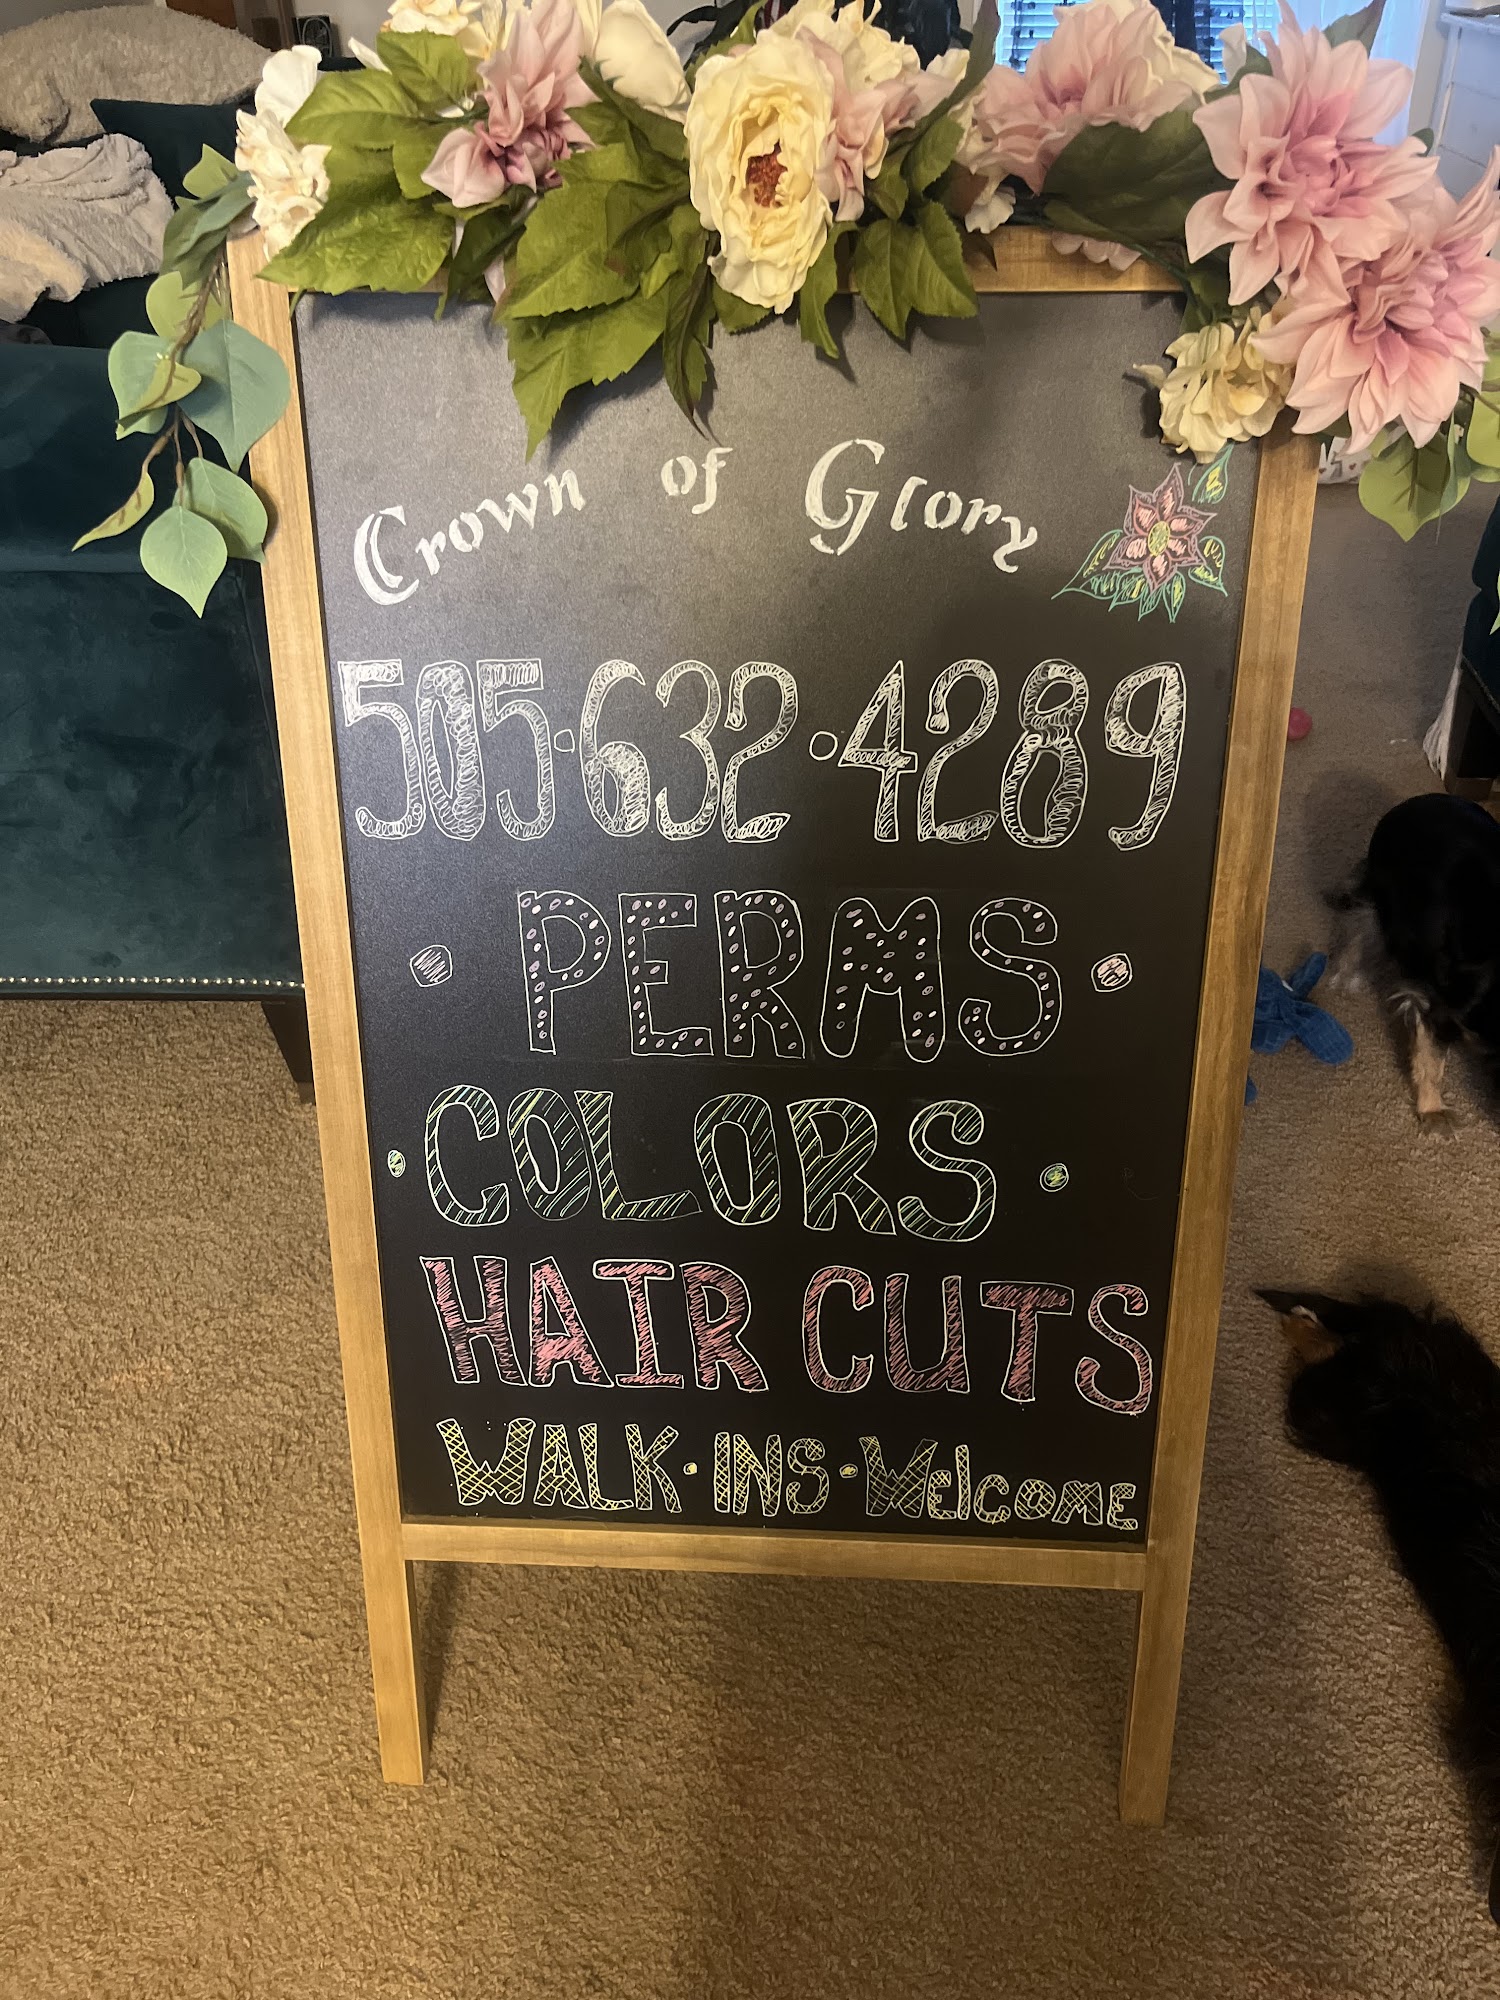 Crown of Glory Salon 222a W Broadway Ave, Bloomfield New Mexico 87413